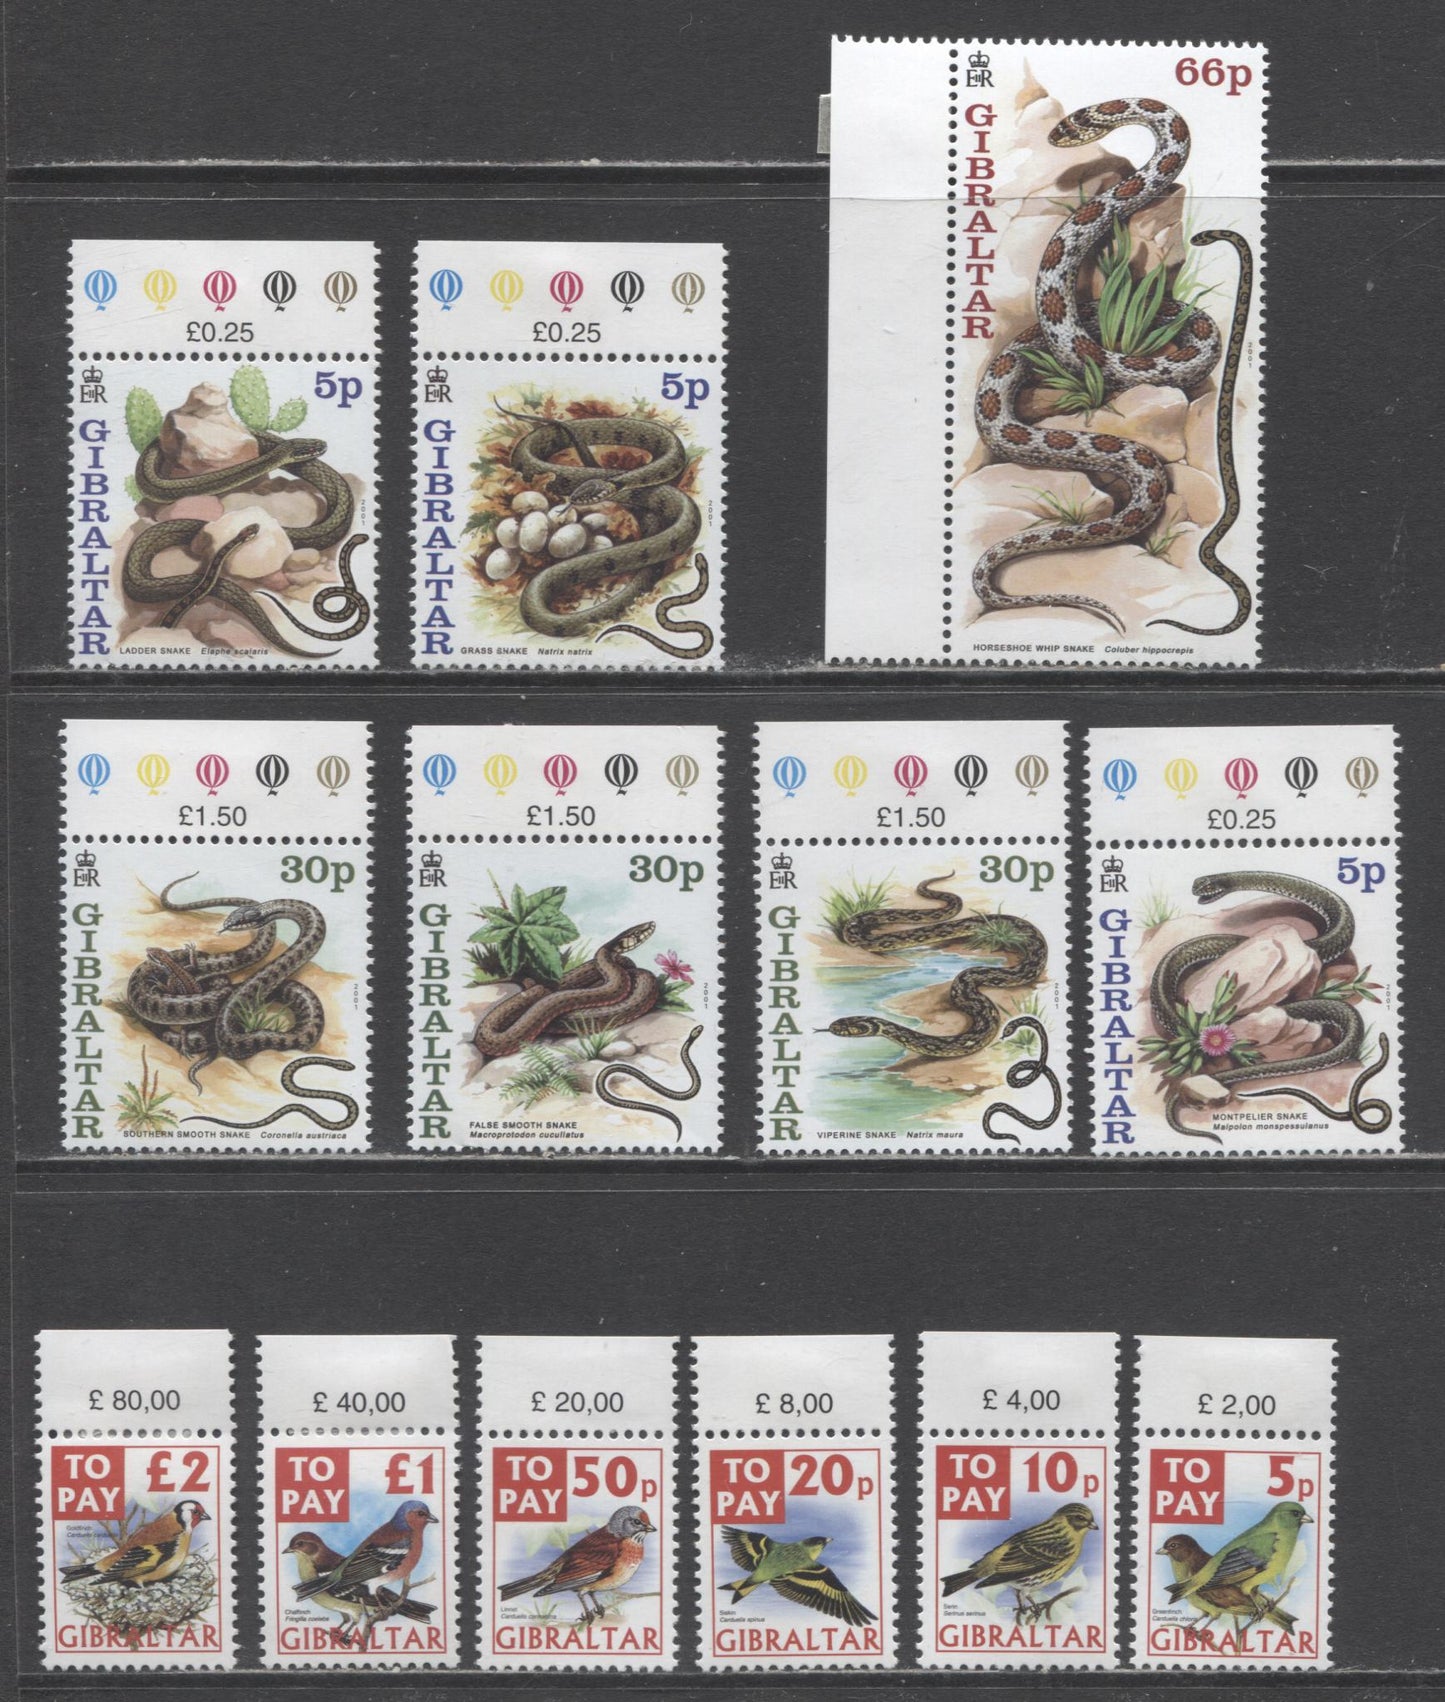 Lot 13 Gibraltar SC#864/J31 2001-2002 New Years Snakes - Finches Postage Dues, 13 VFNH Singles, Click on Listing to See ALL Pictures, 2017 Scott Cat. $21